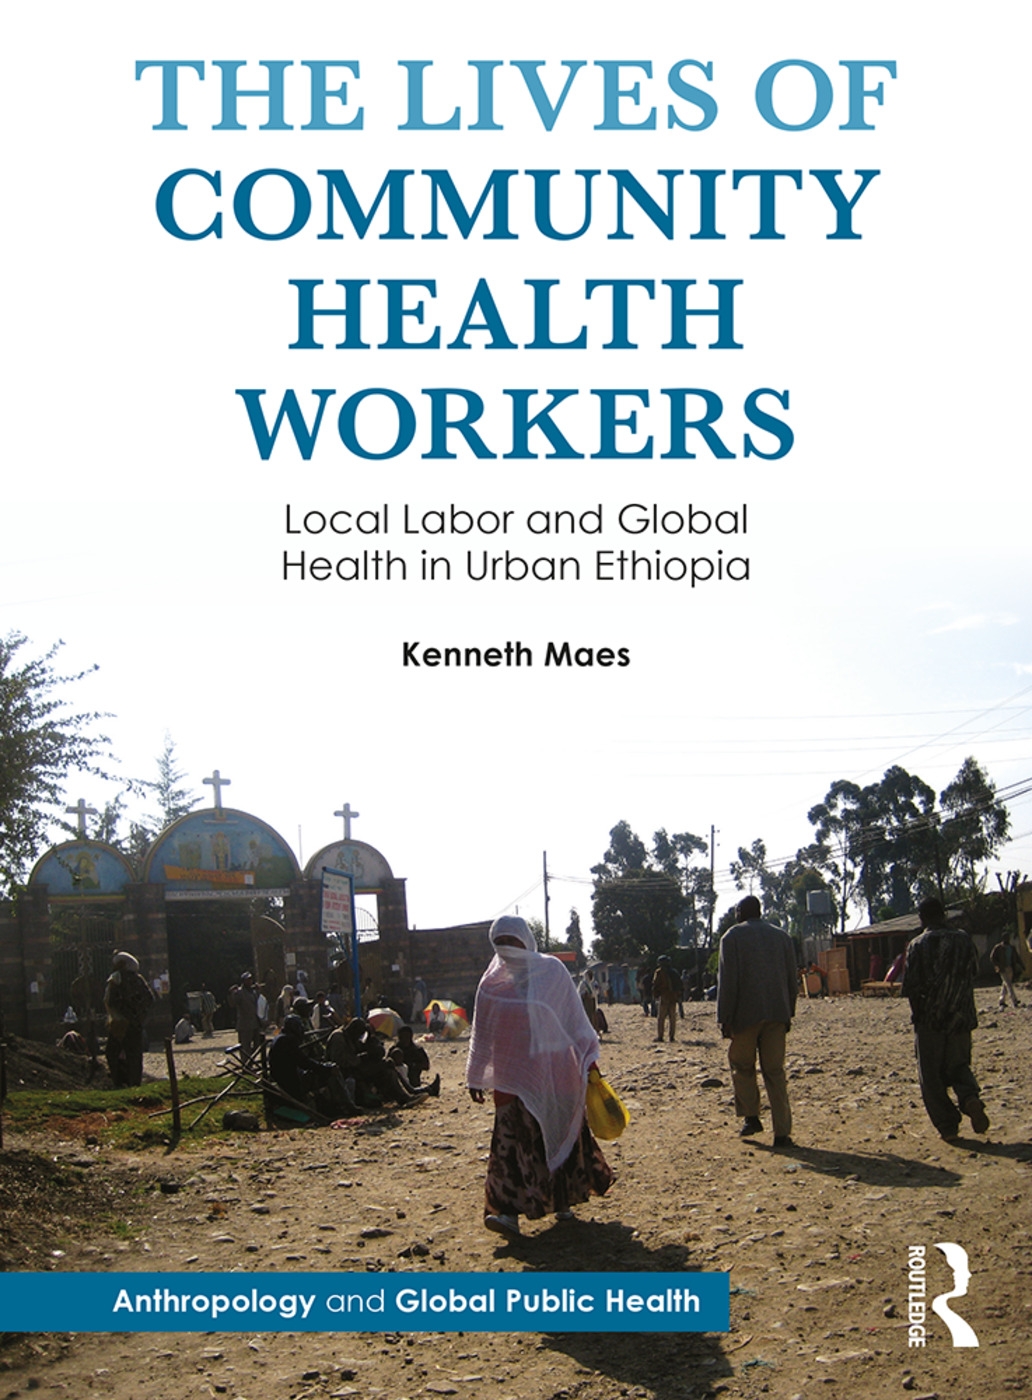 The Lives of Community Health Workers: Local Labor and Global Health in Urban Ethiopia